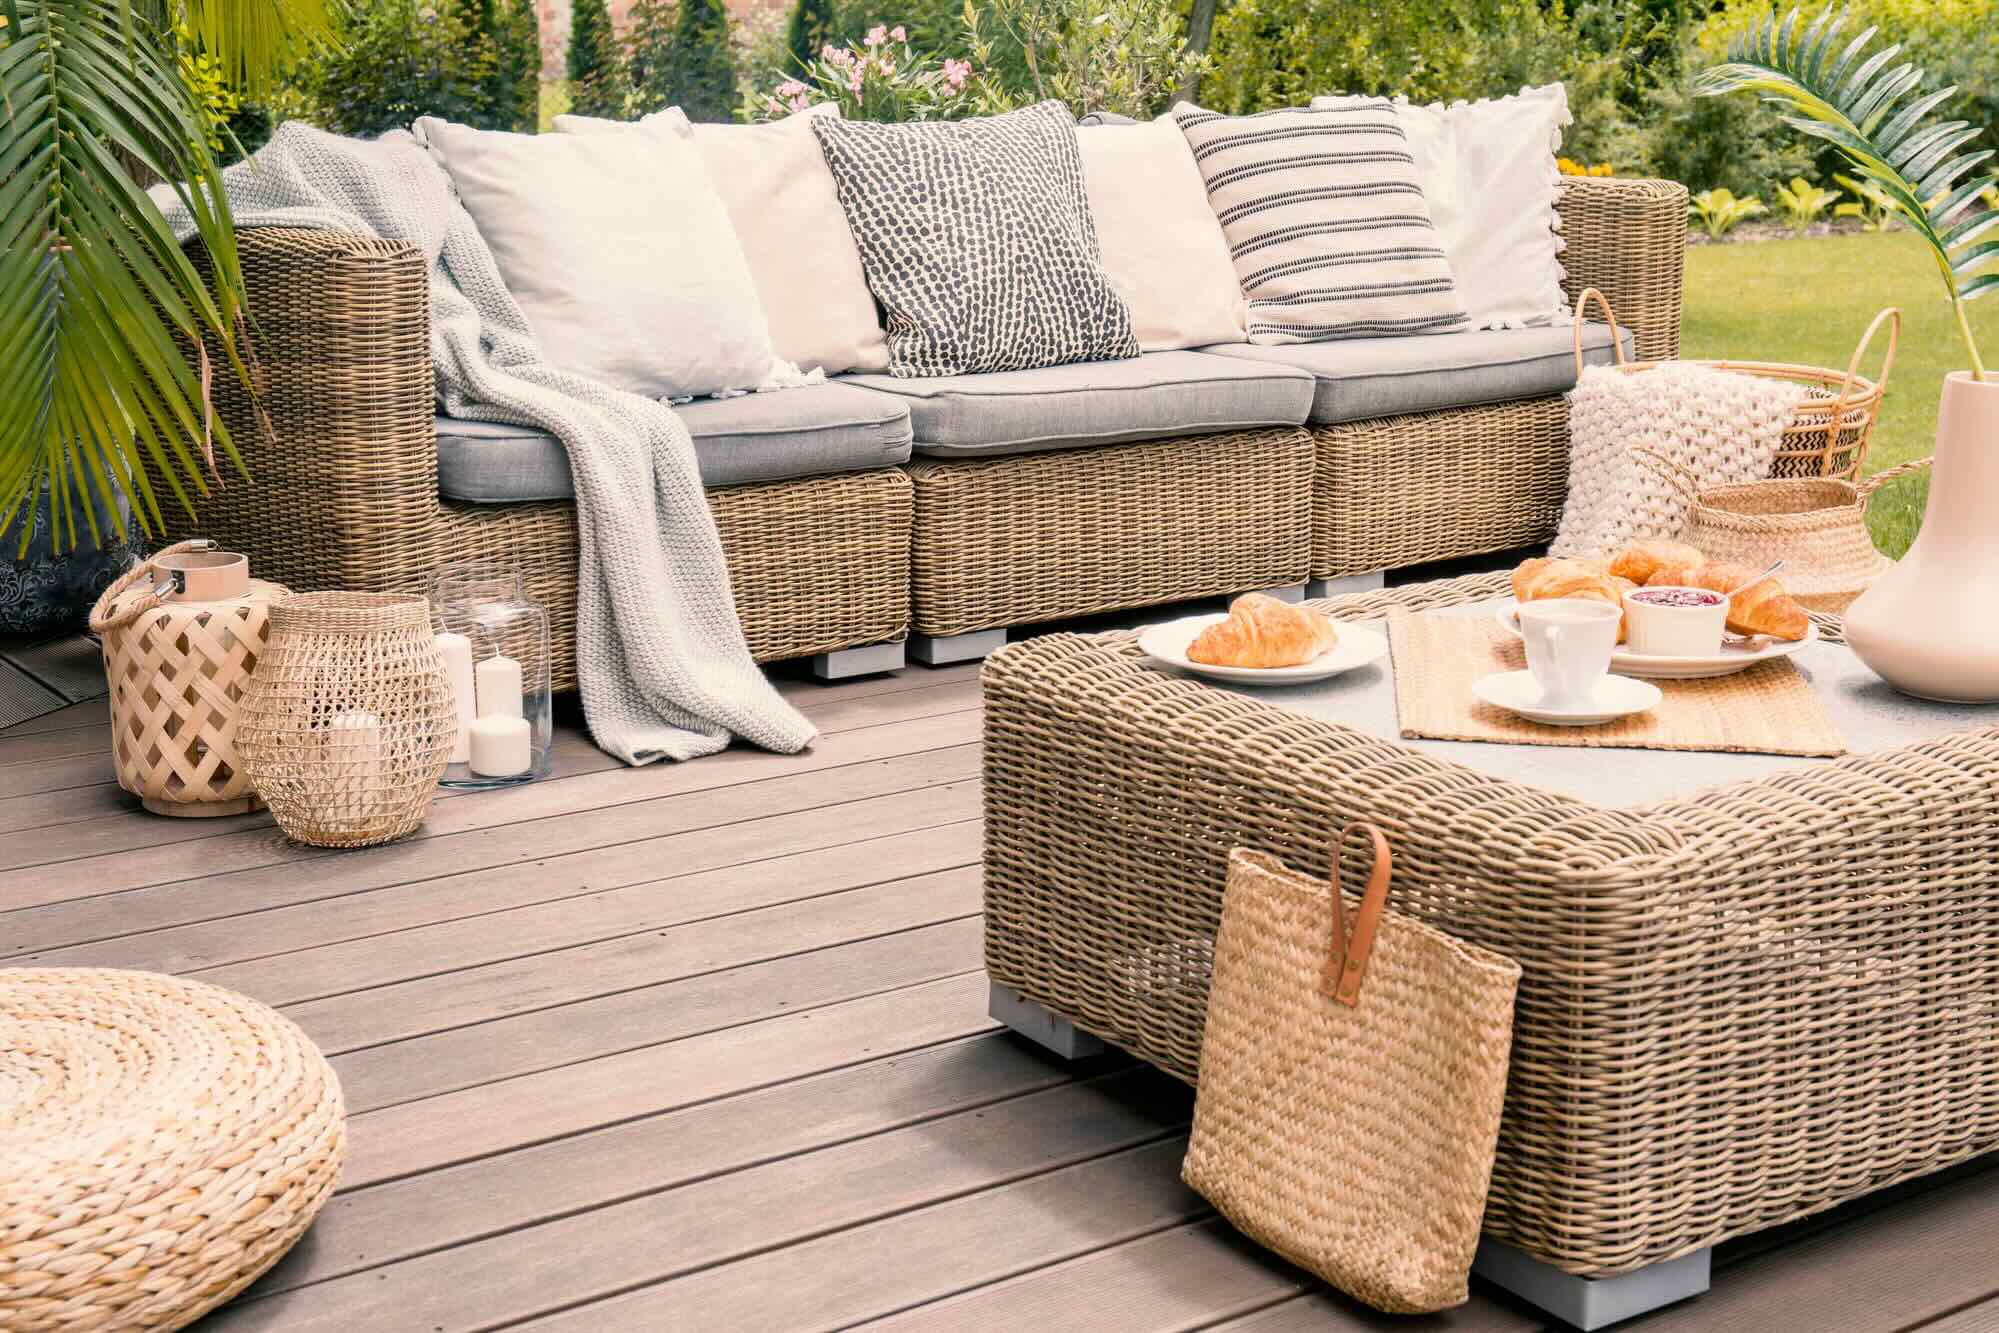 How To Build Outdoor Wicker Furniture